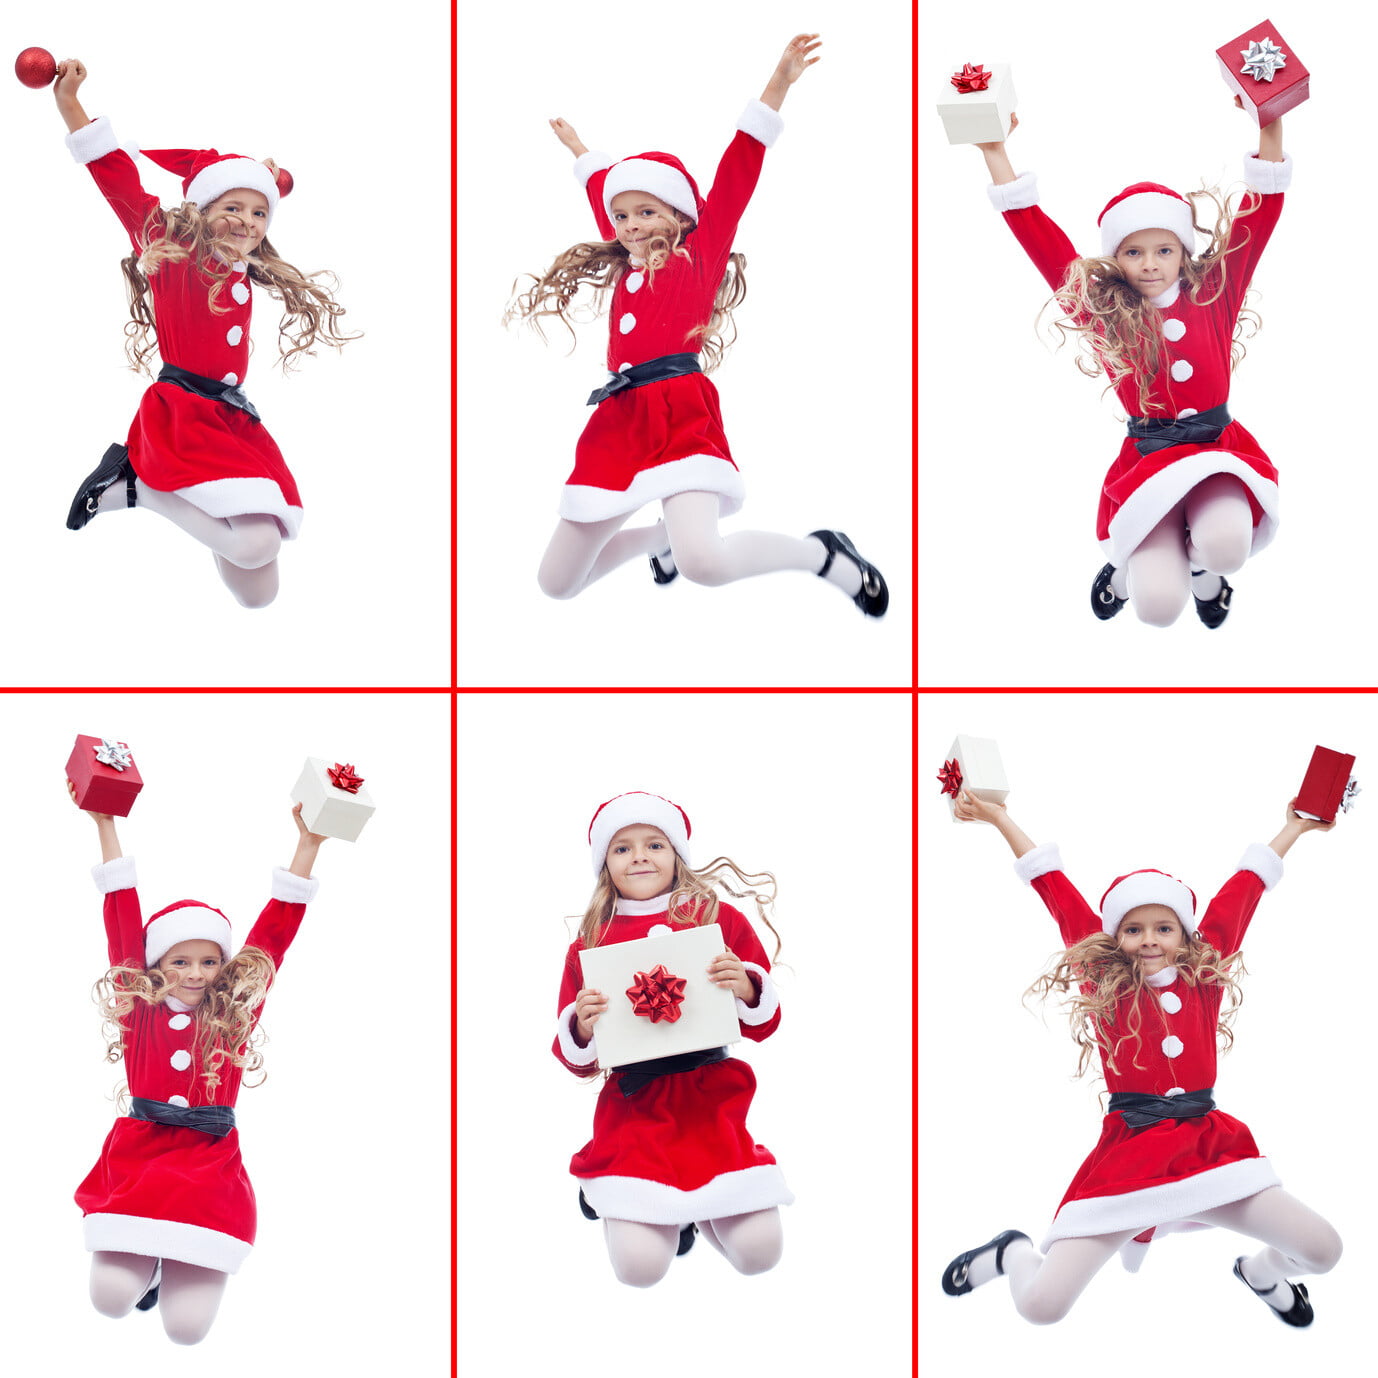 Happy girl with santa costume jumping